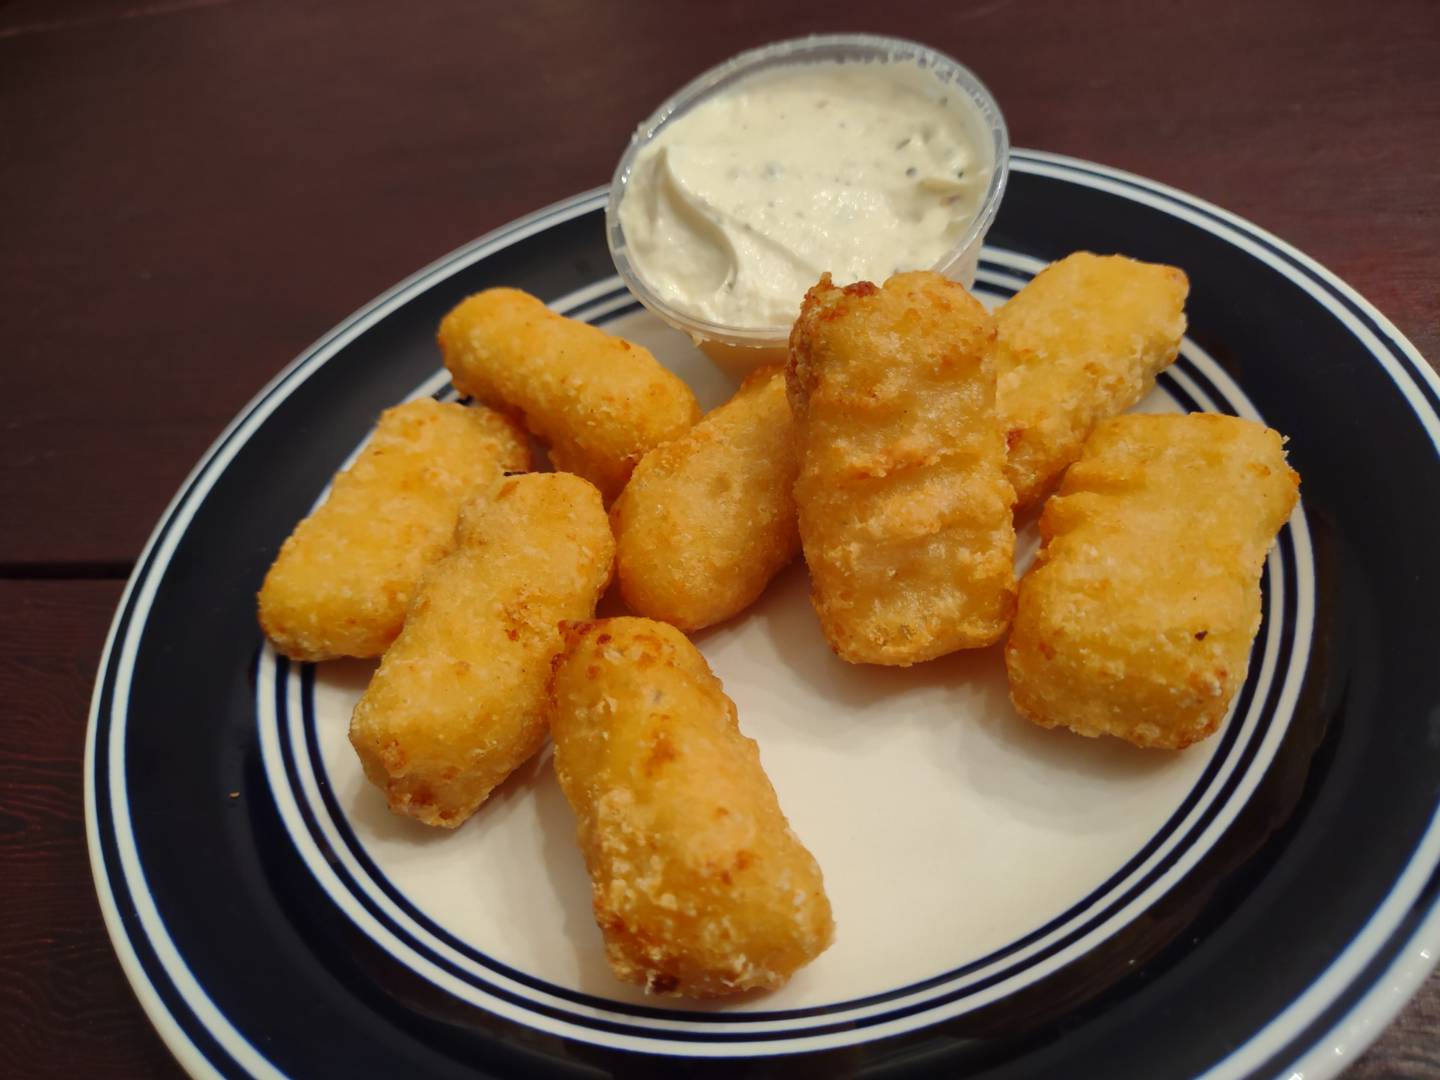 The pepper jack cheese bites at Broadway Pub in Streator are one of several appetizers available at the restaurant.